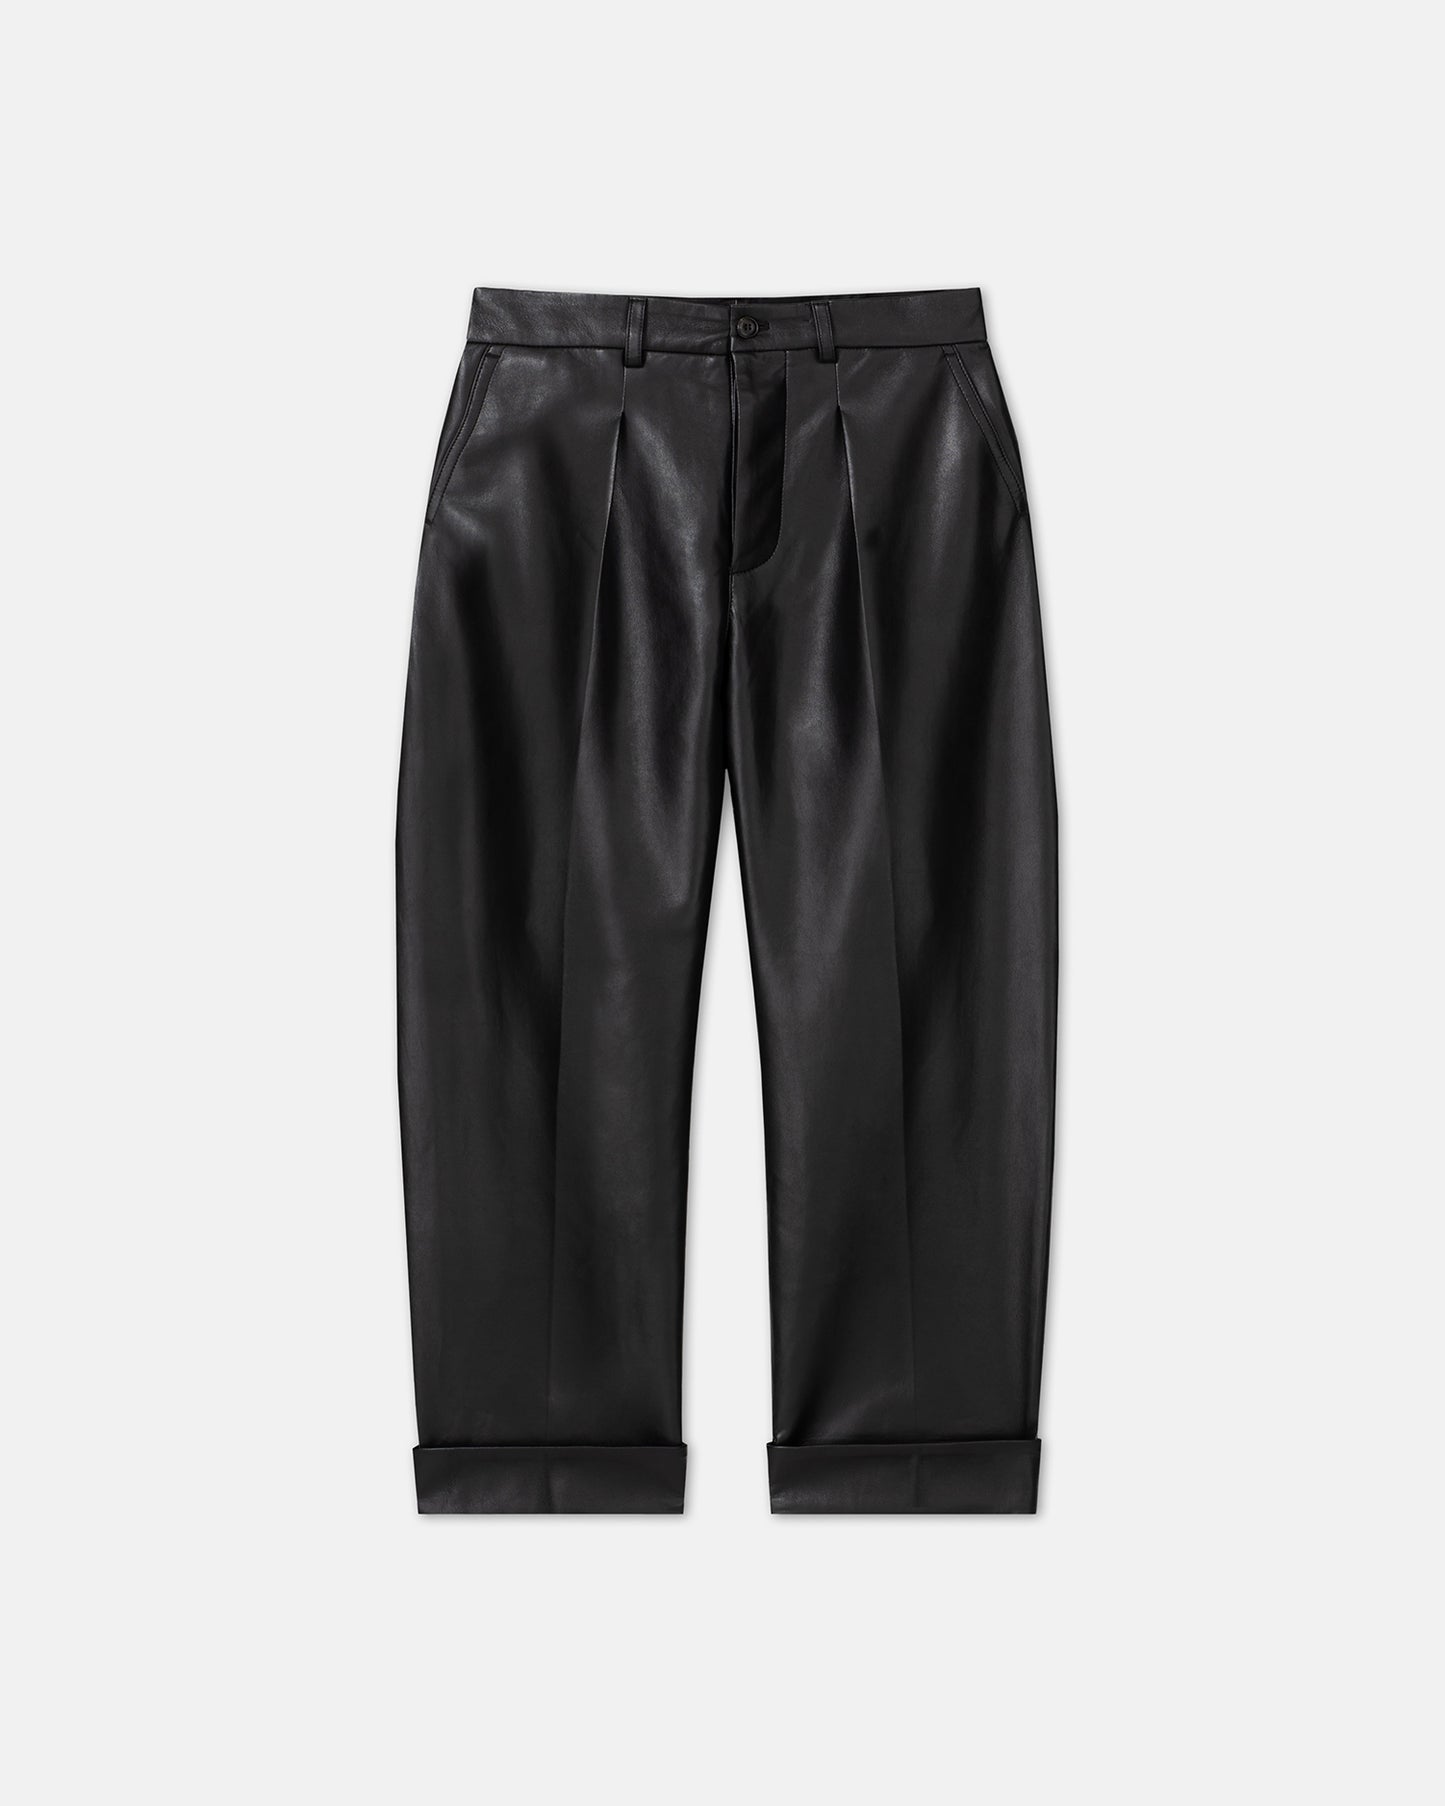 Zayden - Regenerated Leather Tapered Pants - Black